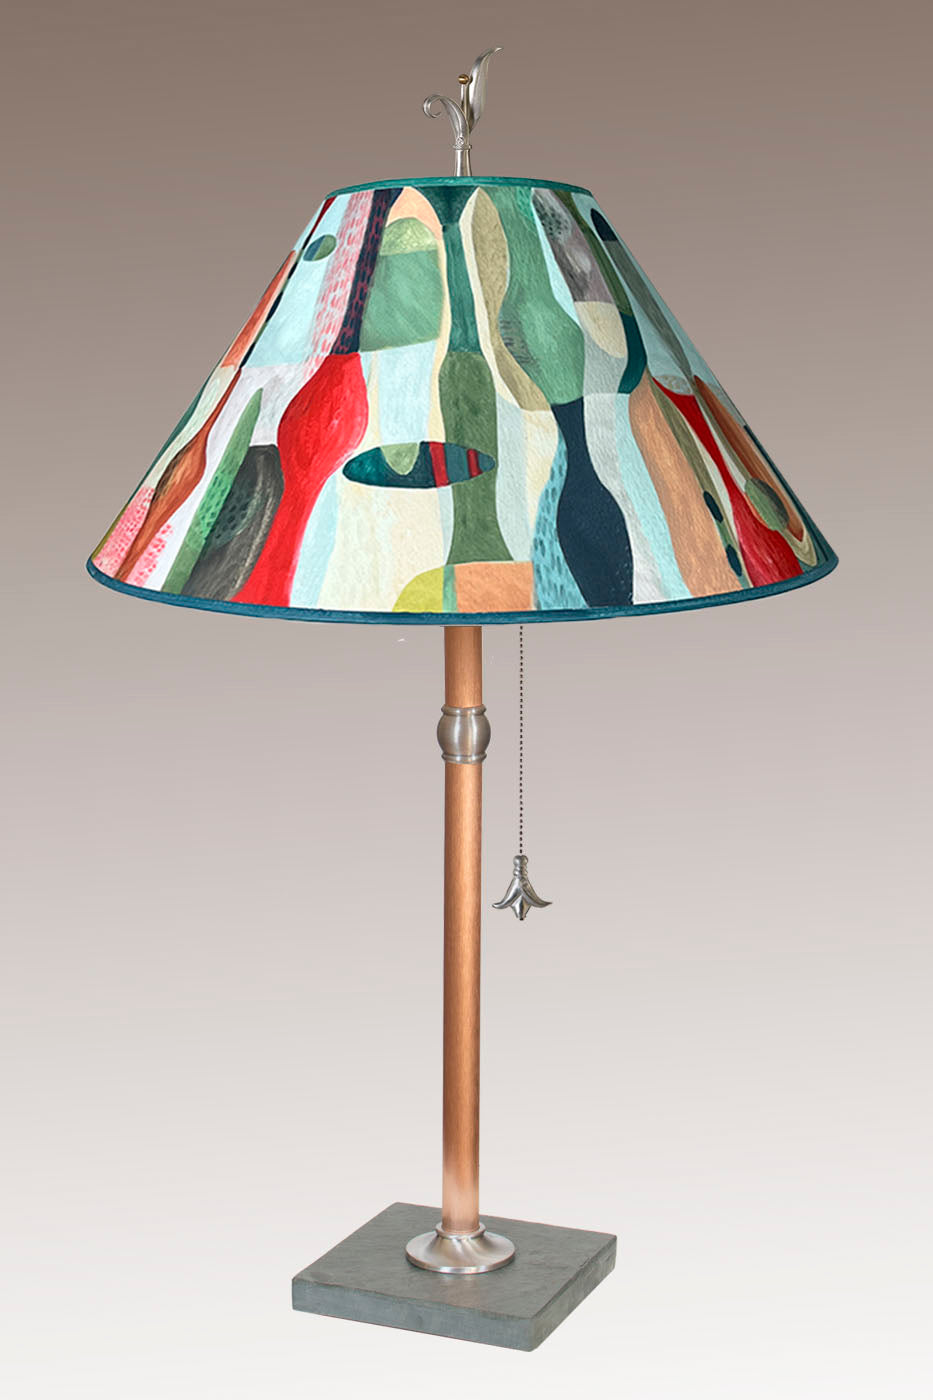 Janna Ugone &amp; Co Table Lamp Copper Table Lamp with Large Conical Shade in Riviera in Poppy